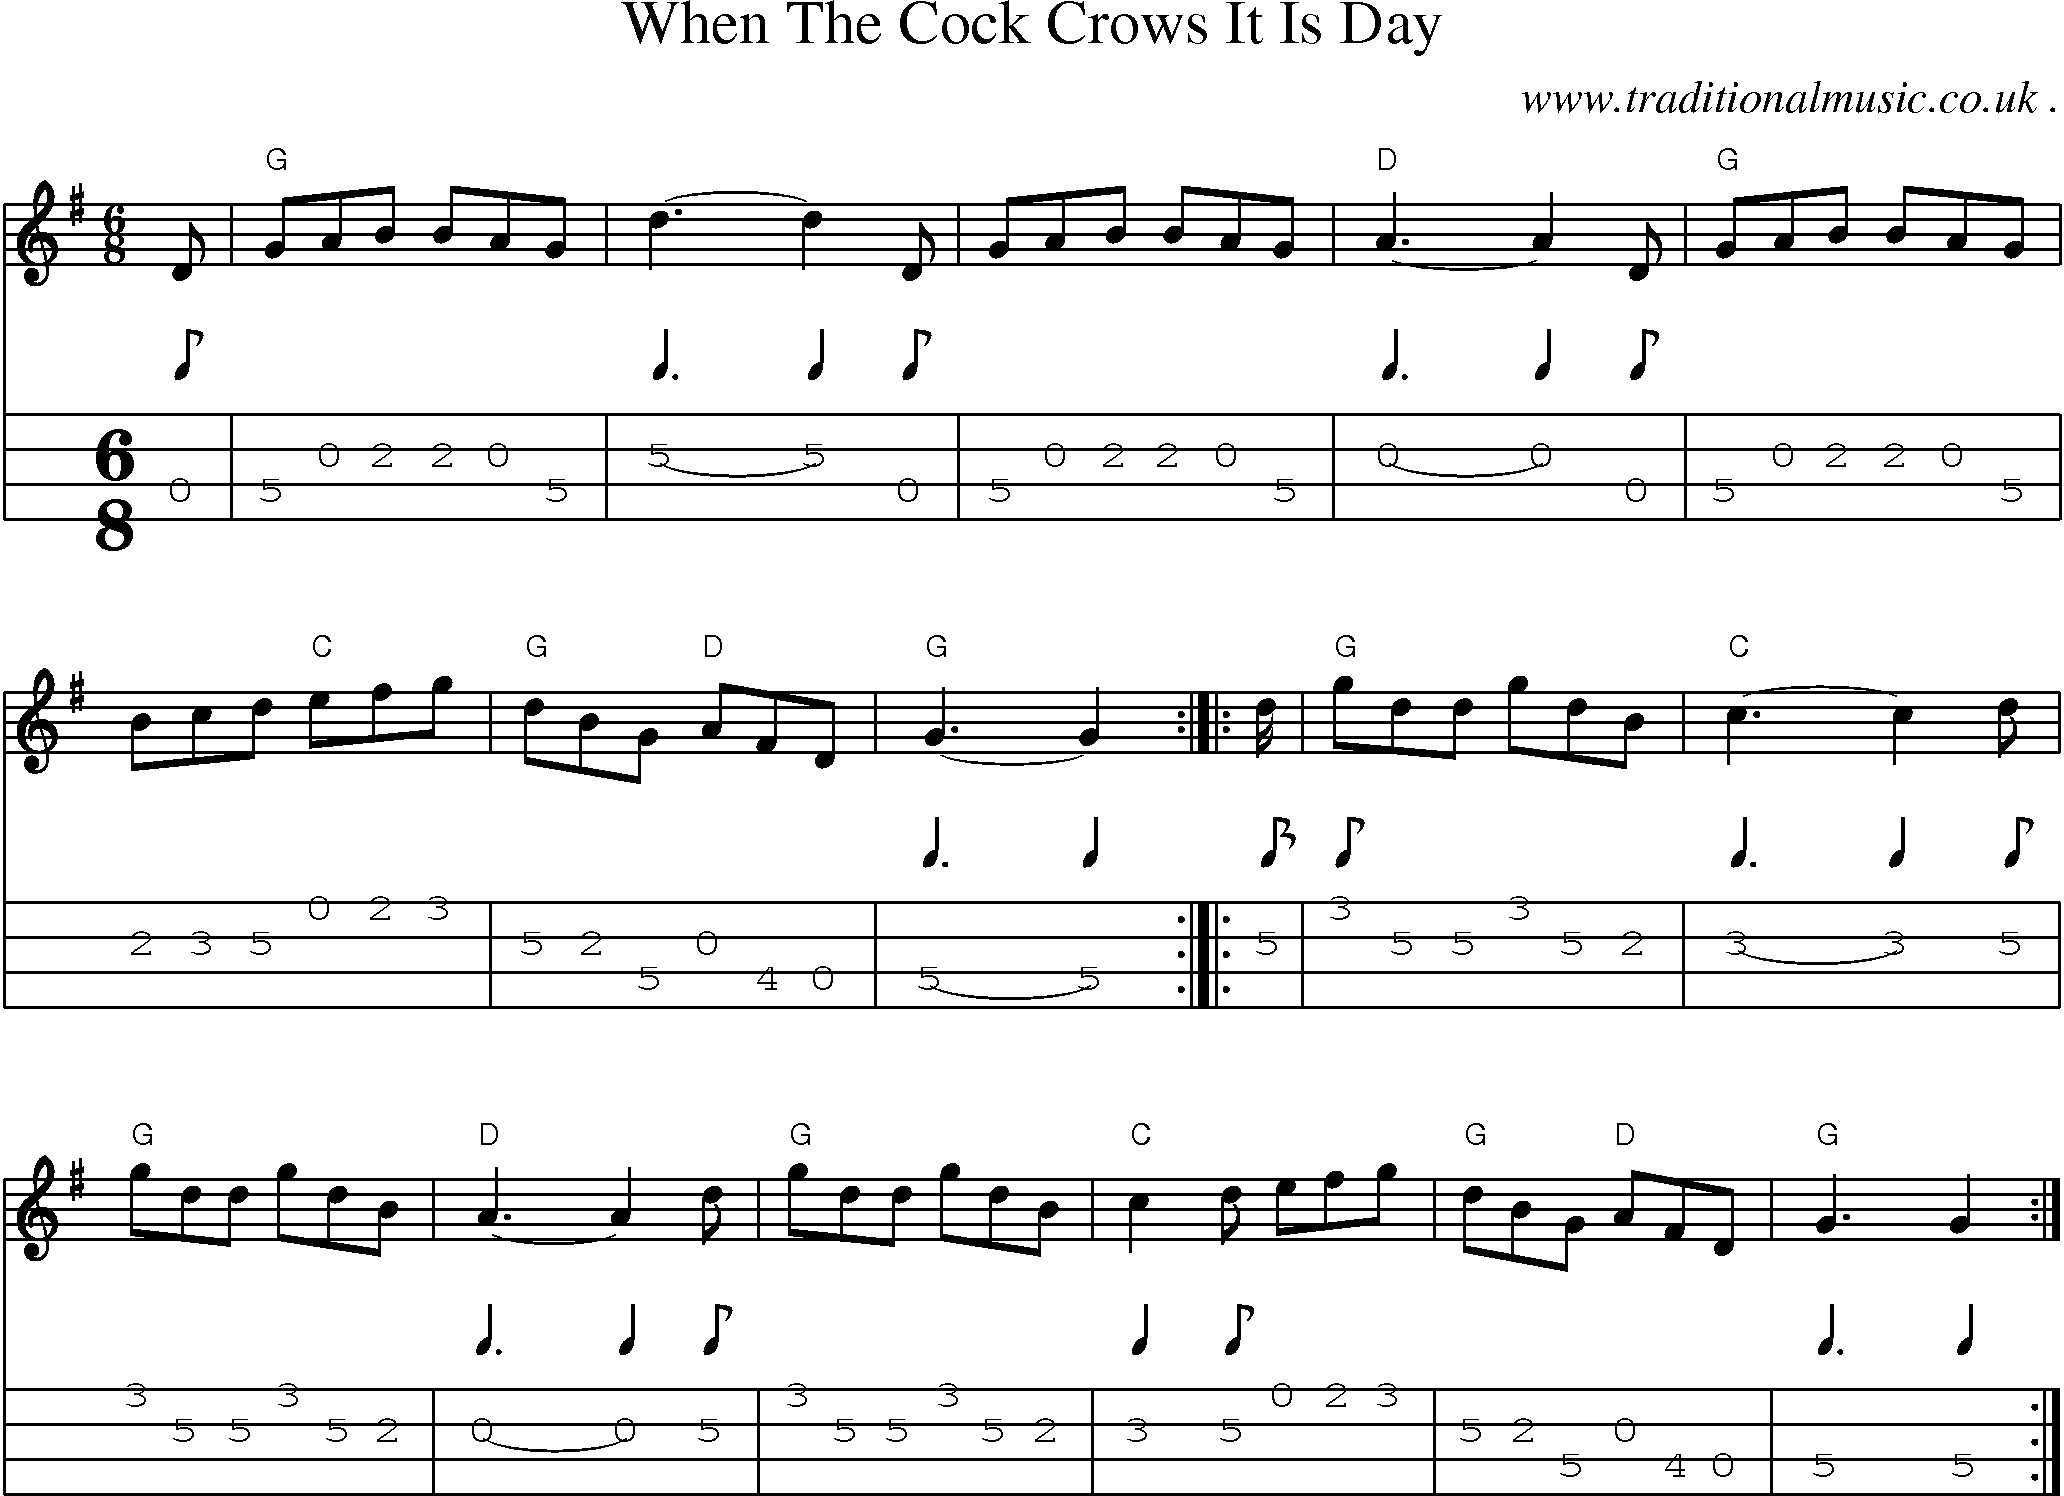 Music Score and Guitar Tabs for When The Cock Crows It Is Day